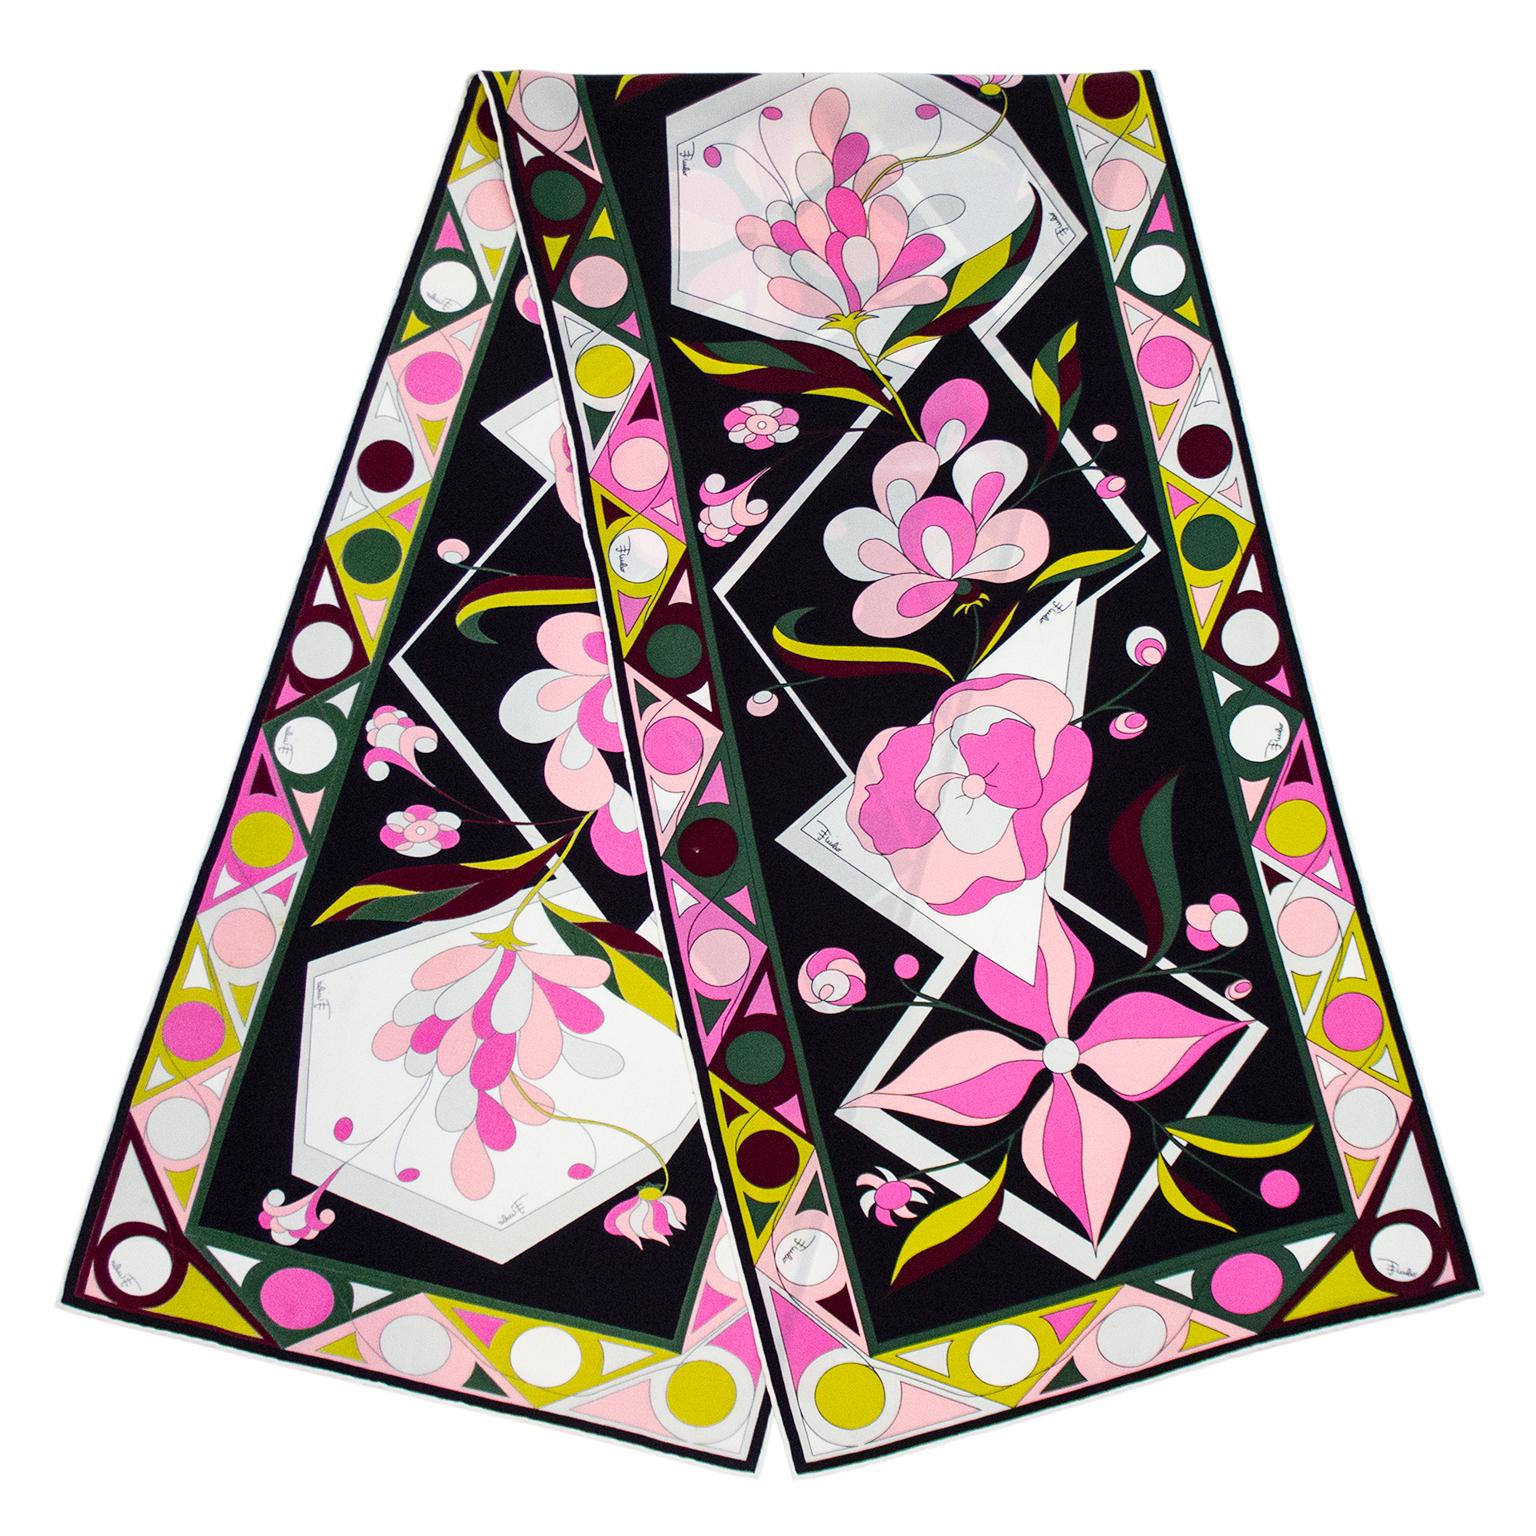 This is such a fun 1990s Emilio Pucci silk scarf! A floral take on the iconic Pucci abstract geometric print with pink flowers along the centre. This scarf features such a great colour combination, with black, white, pink, brown, dark green and